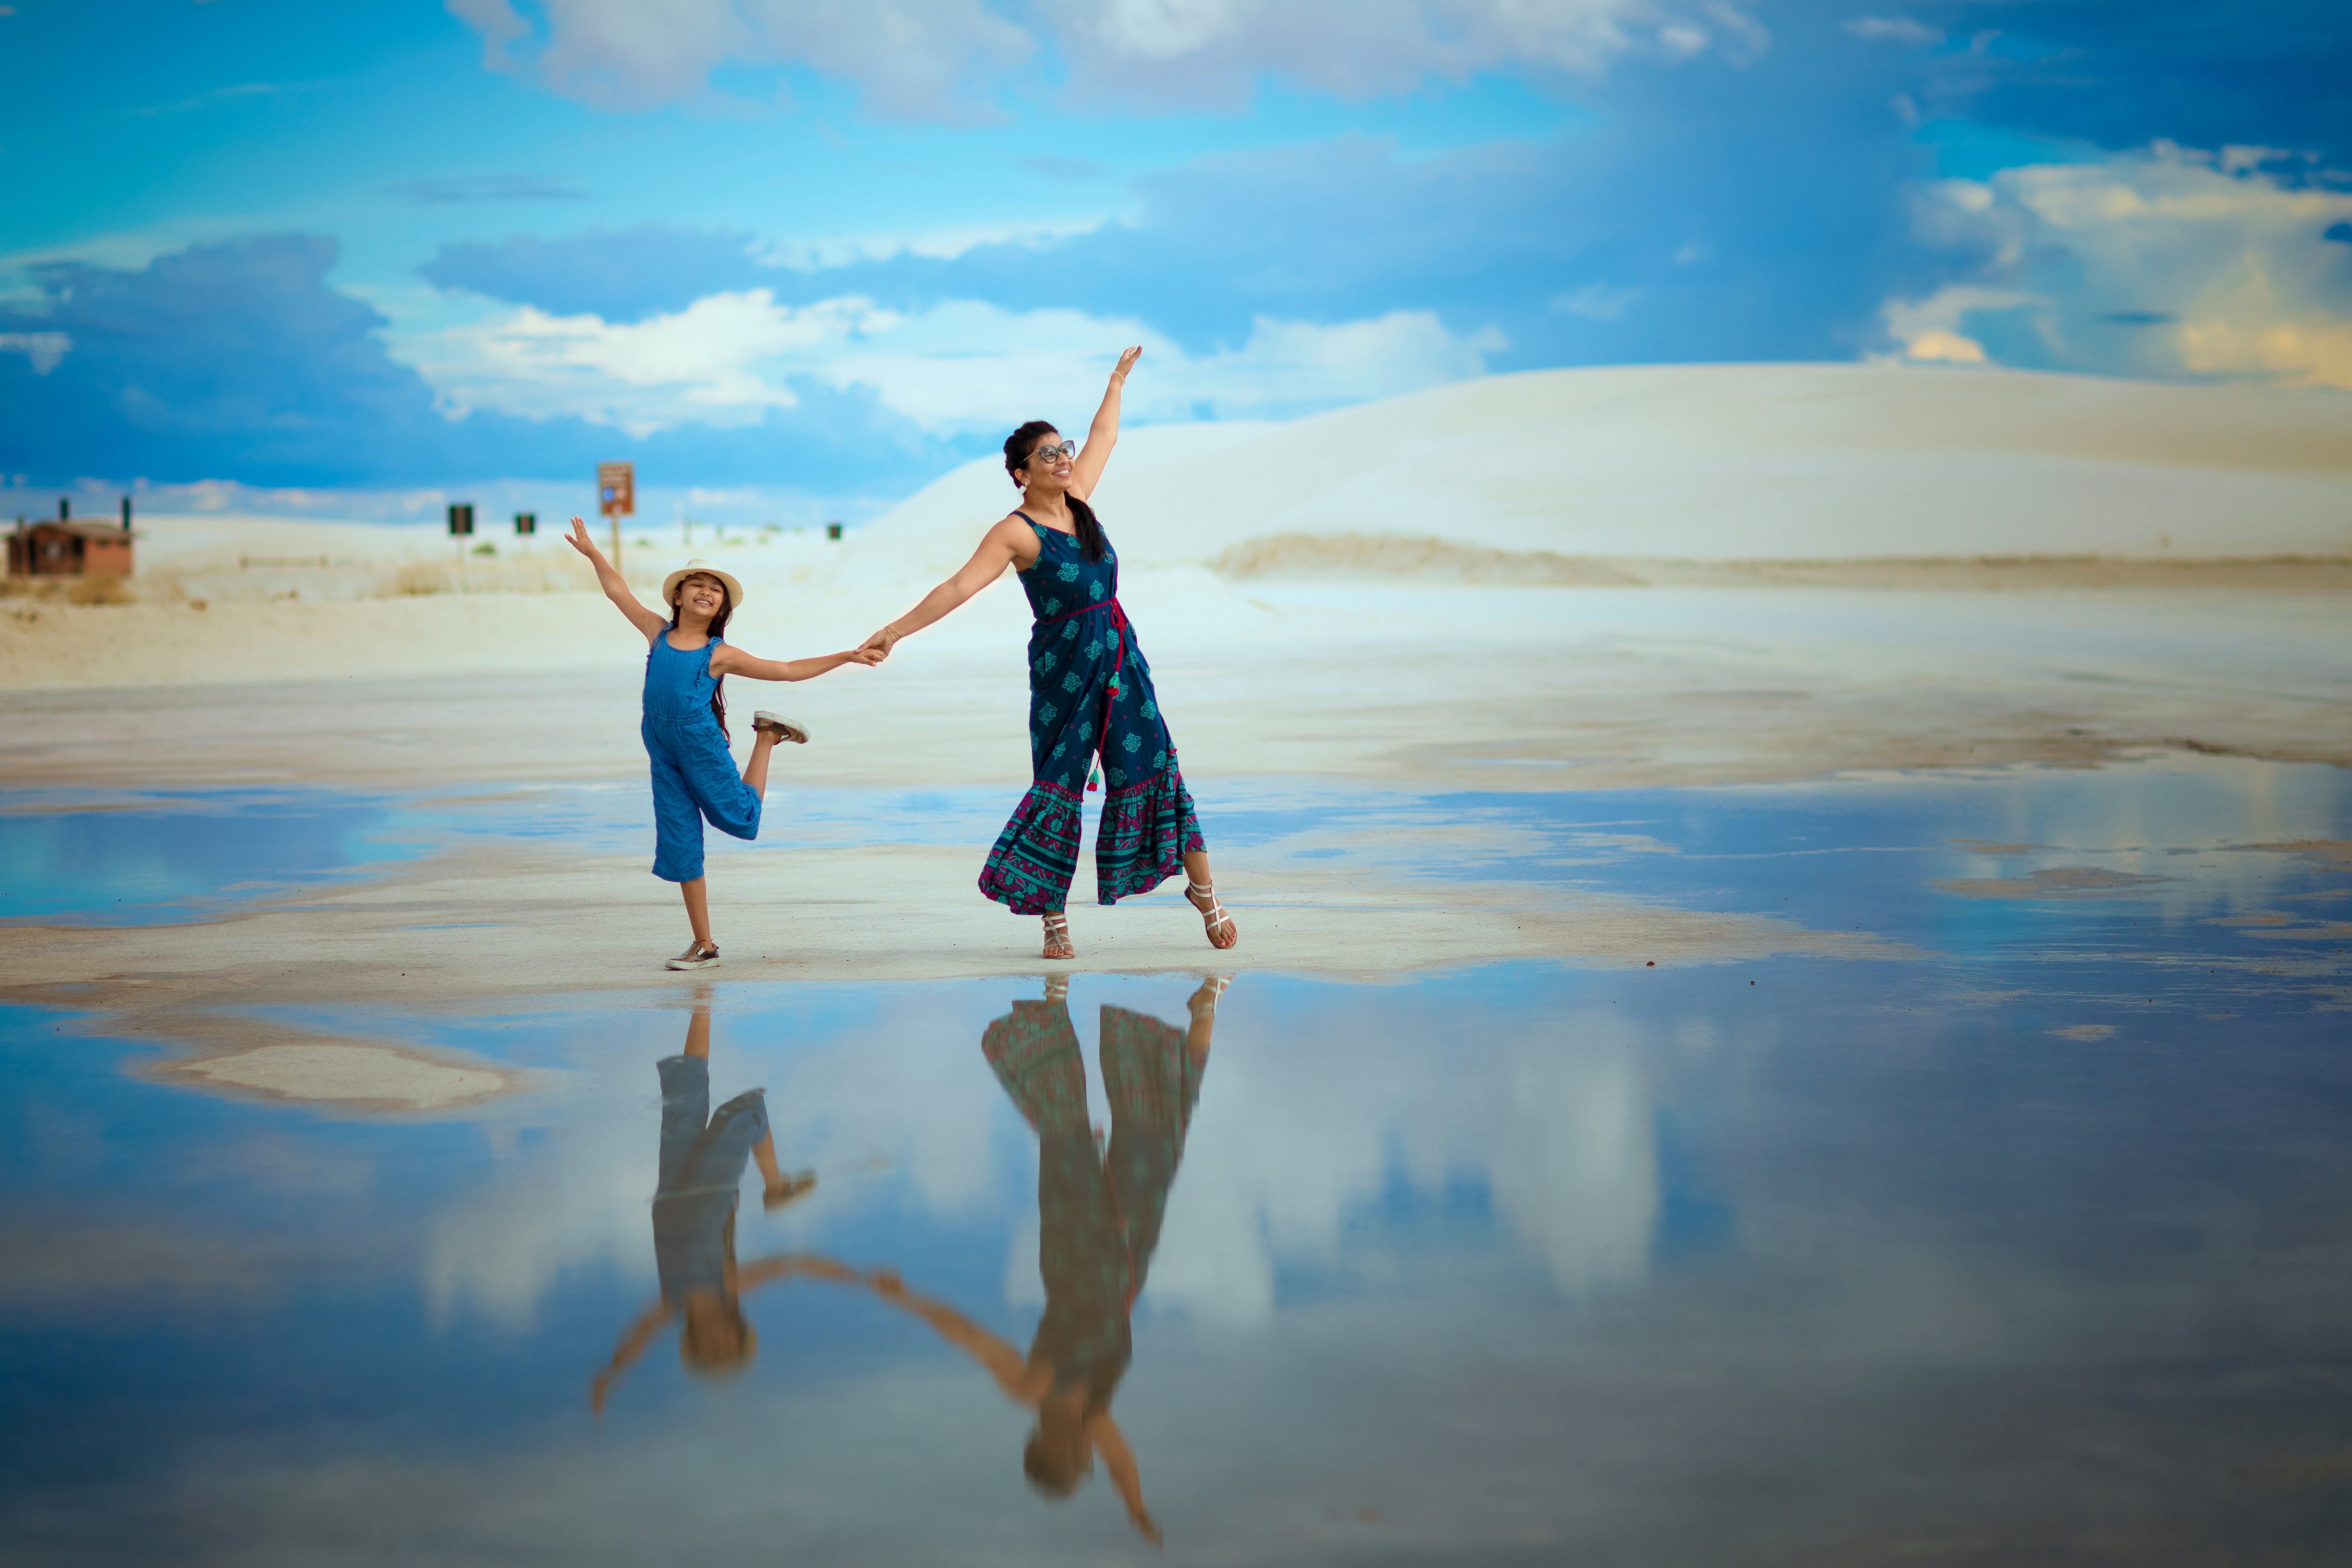 great photo recipe,how to photograph a family trip to white sands national park in new mexcio, united states. i found this puddle just after the rain and got these beautiful reflections; woman in blue and white dress standing on brown sand during daytime